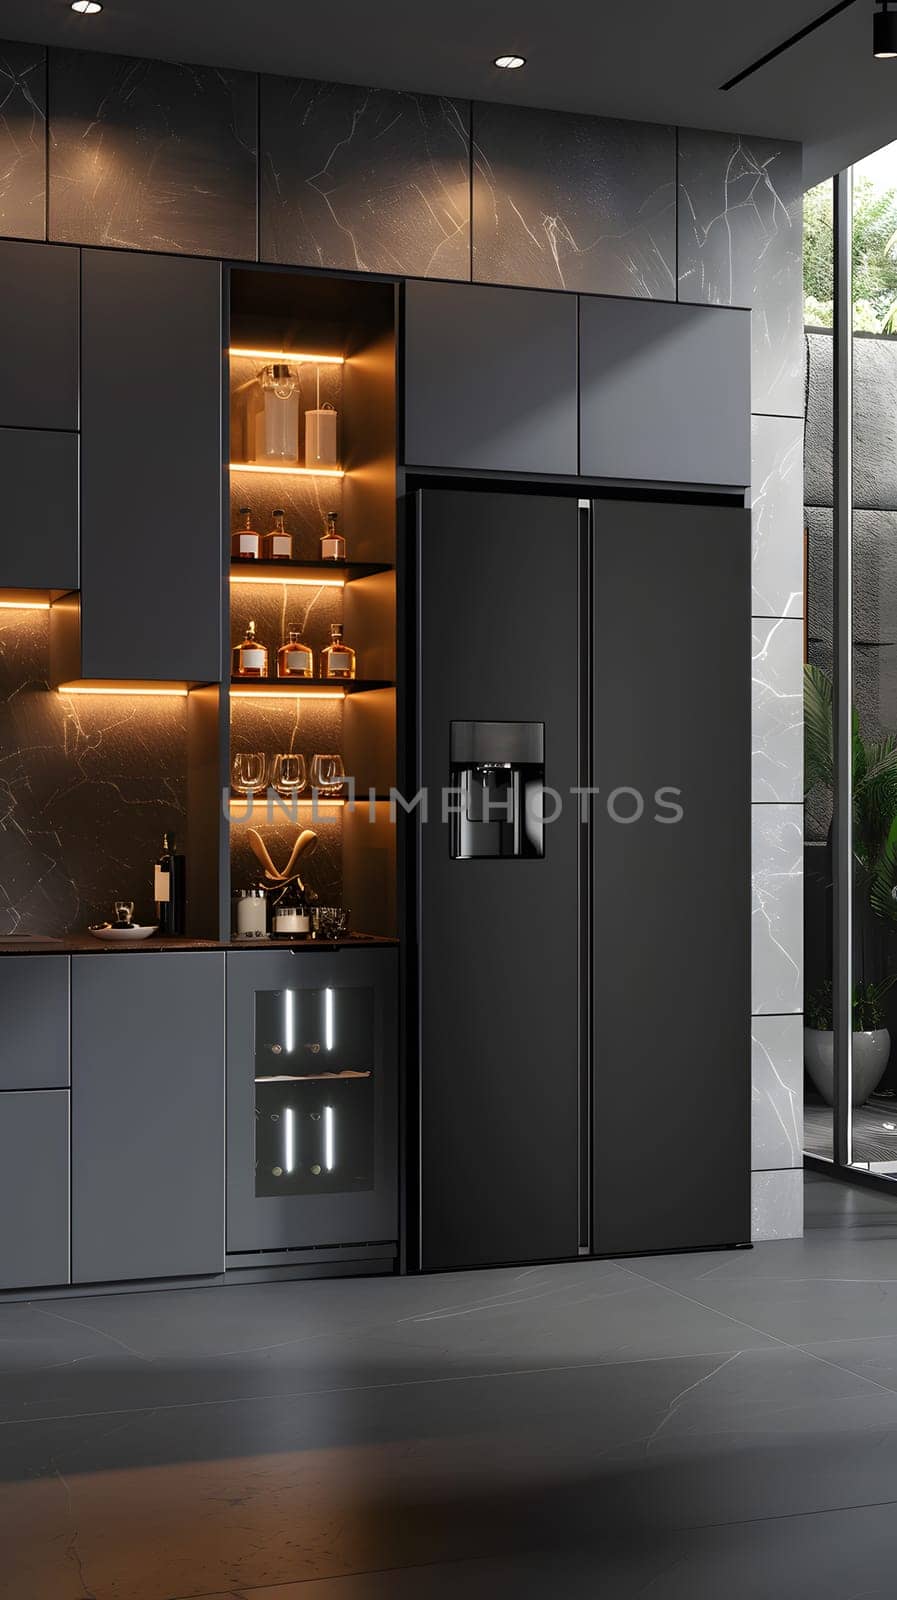 Kitchen with dark cabinetry and matching appliances exudes modern elegance by Nadtochiy